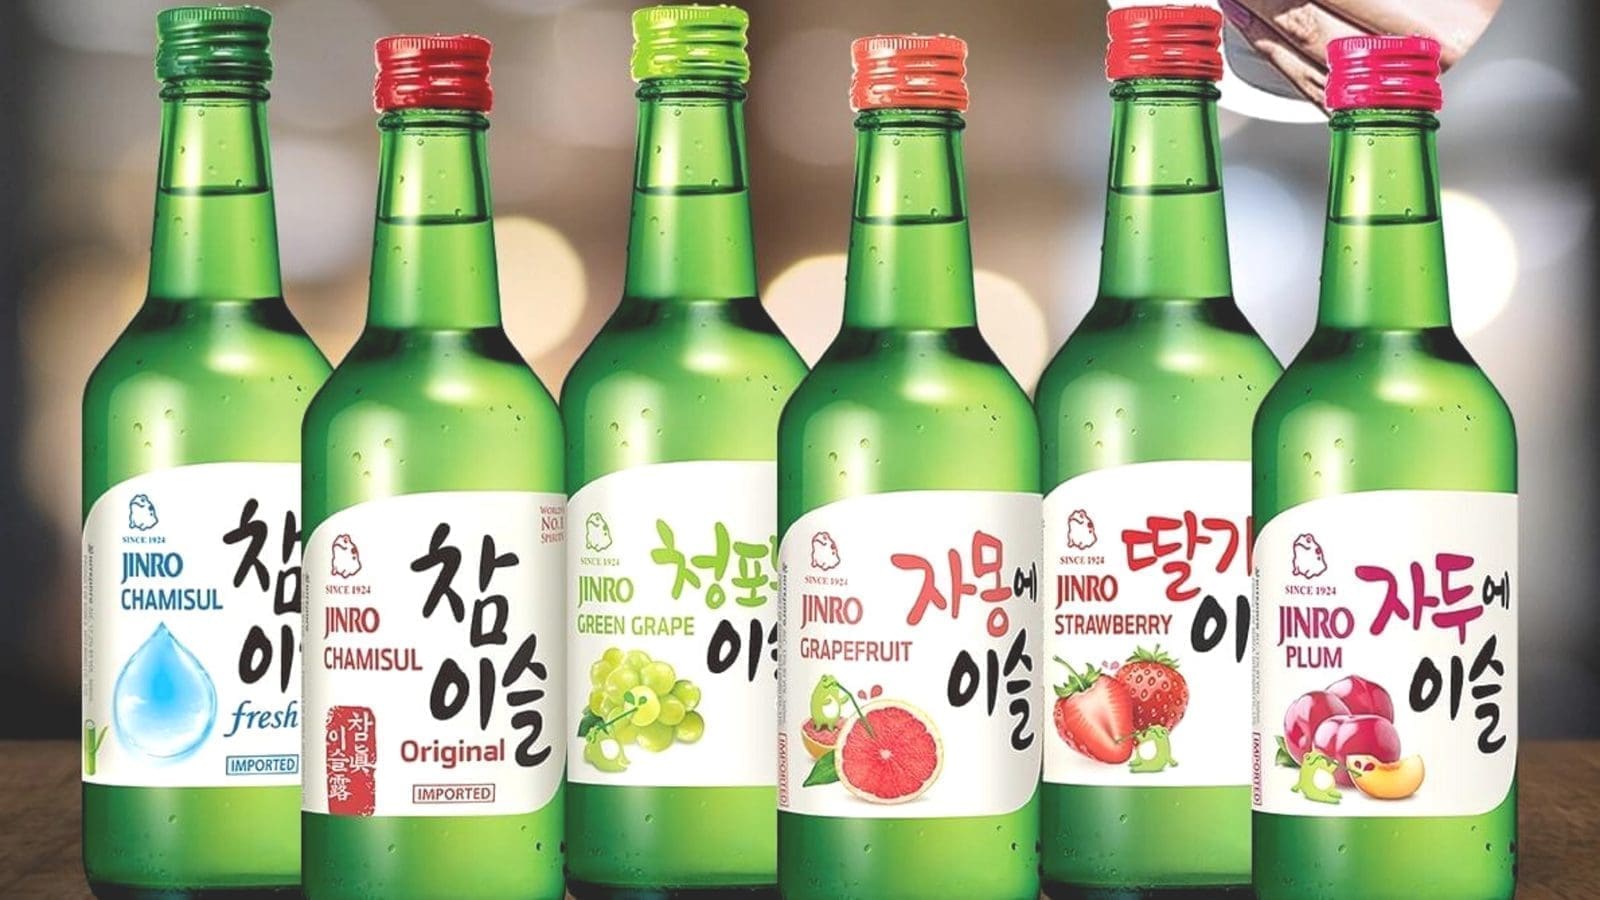 Soju volumes to grow buoyed by Korean culture, but price factor could derail the waves: IWSR